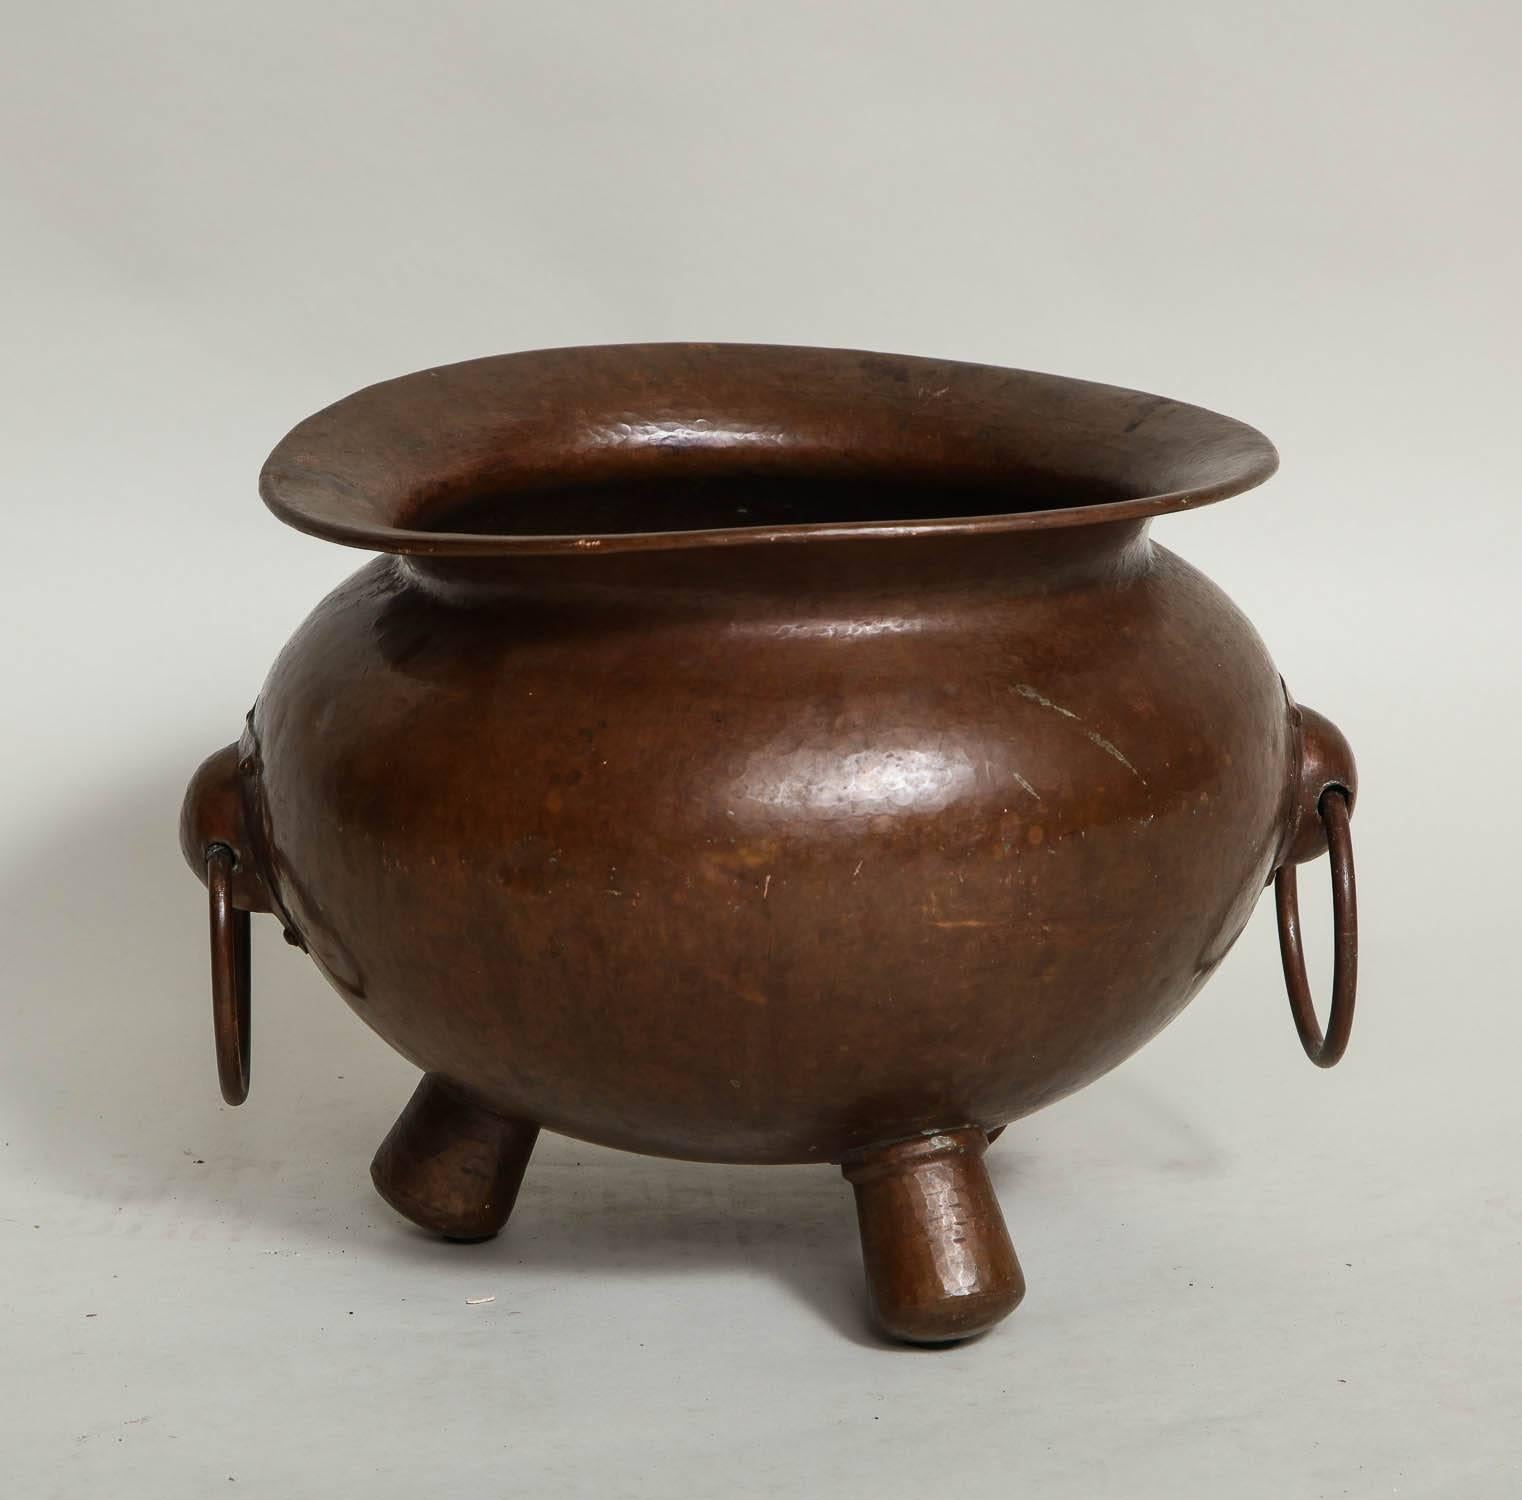 Fine early 20th century hammered copper cauldron form vessel, having generous rolled lip, swelled body with two applied handles and standing on stubby hollow feet, the whole with rich patination. Unsigned.